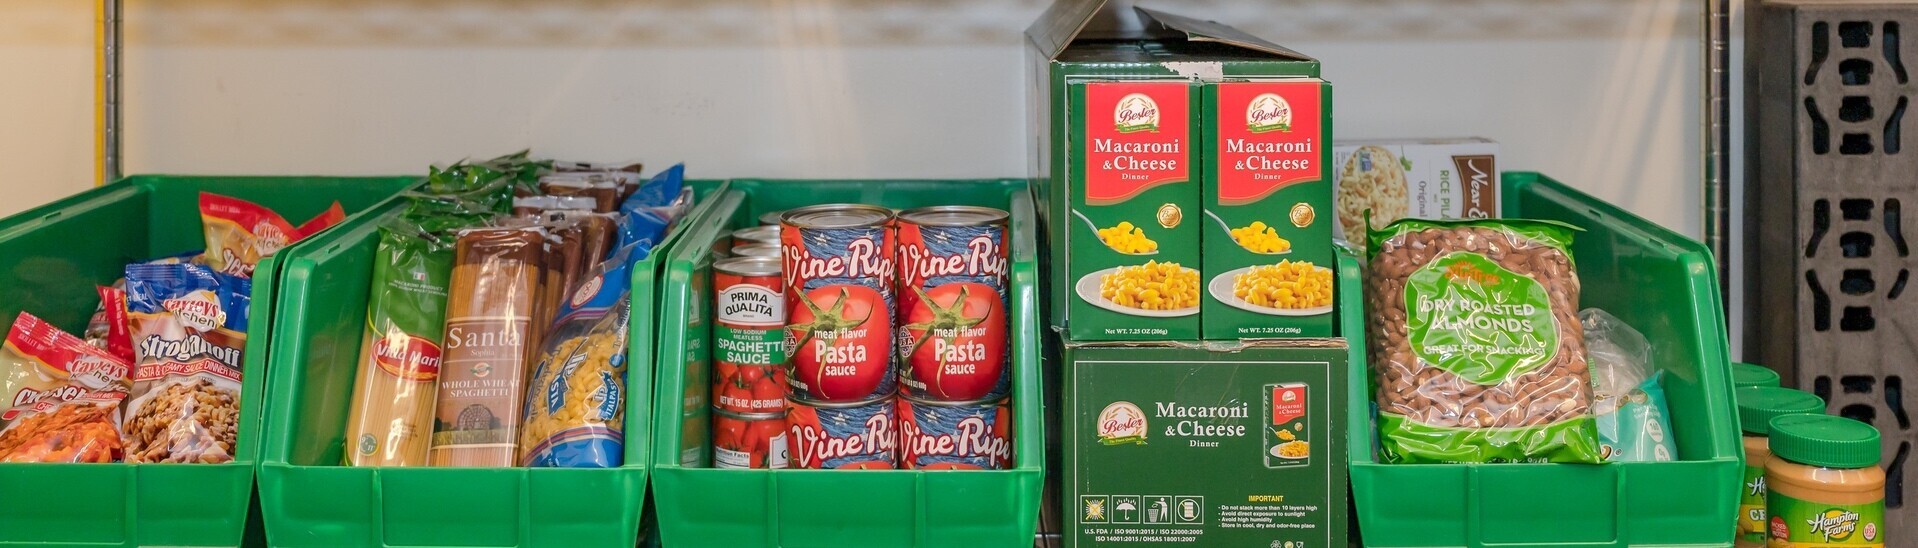 Green bins holding bagged stuffing, packaged pasta, canned sauce, boxed macaroni and cheese, and bagged nuts.